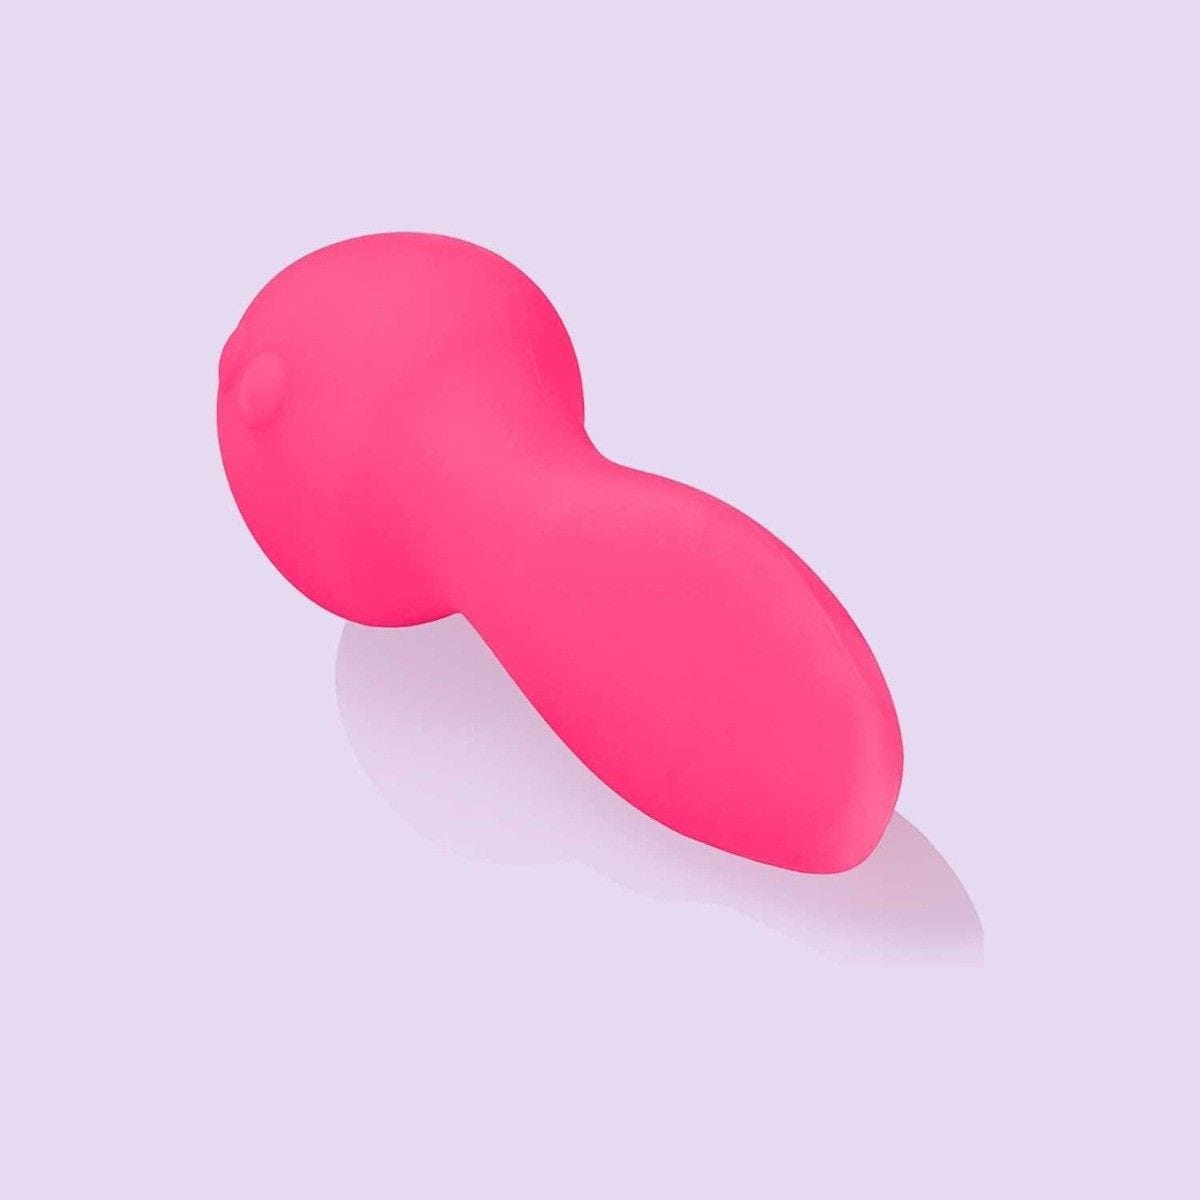 Flicker Tongue vibrator Pink 10 vibrations mode-Wet For pic